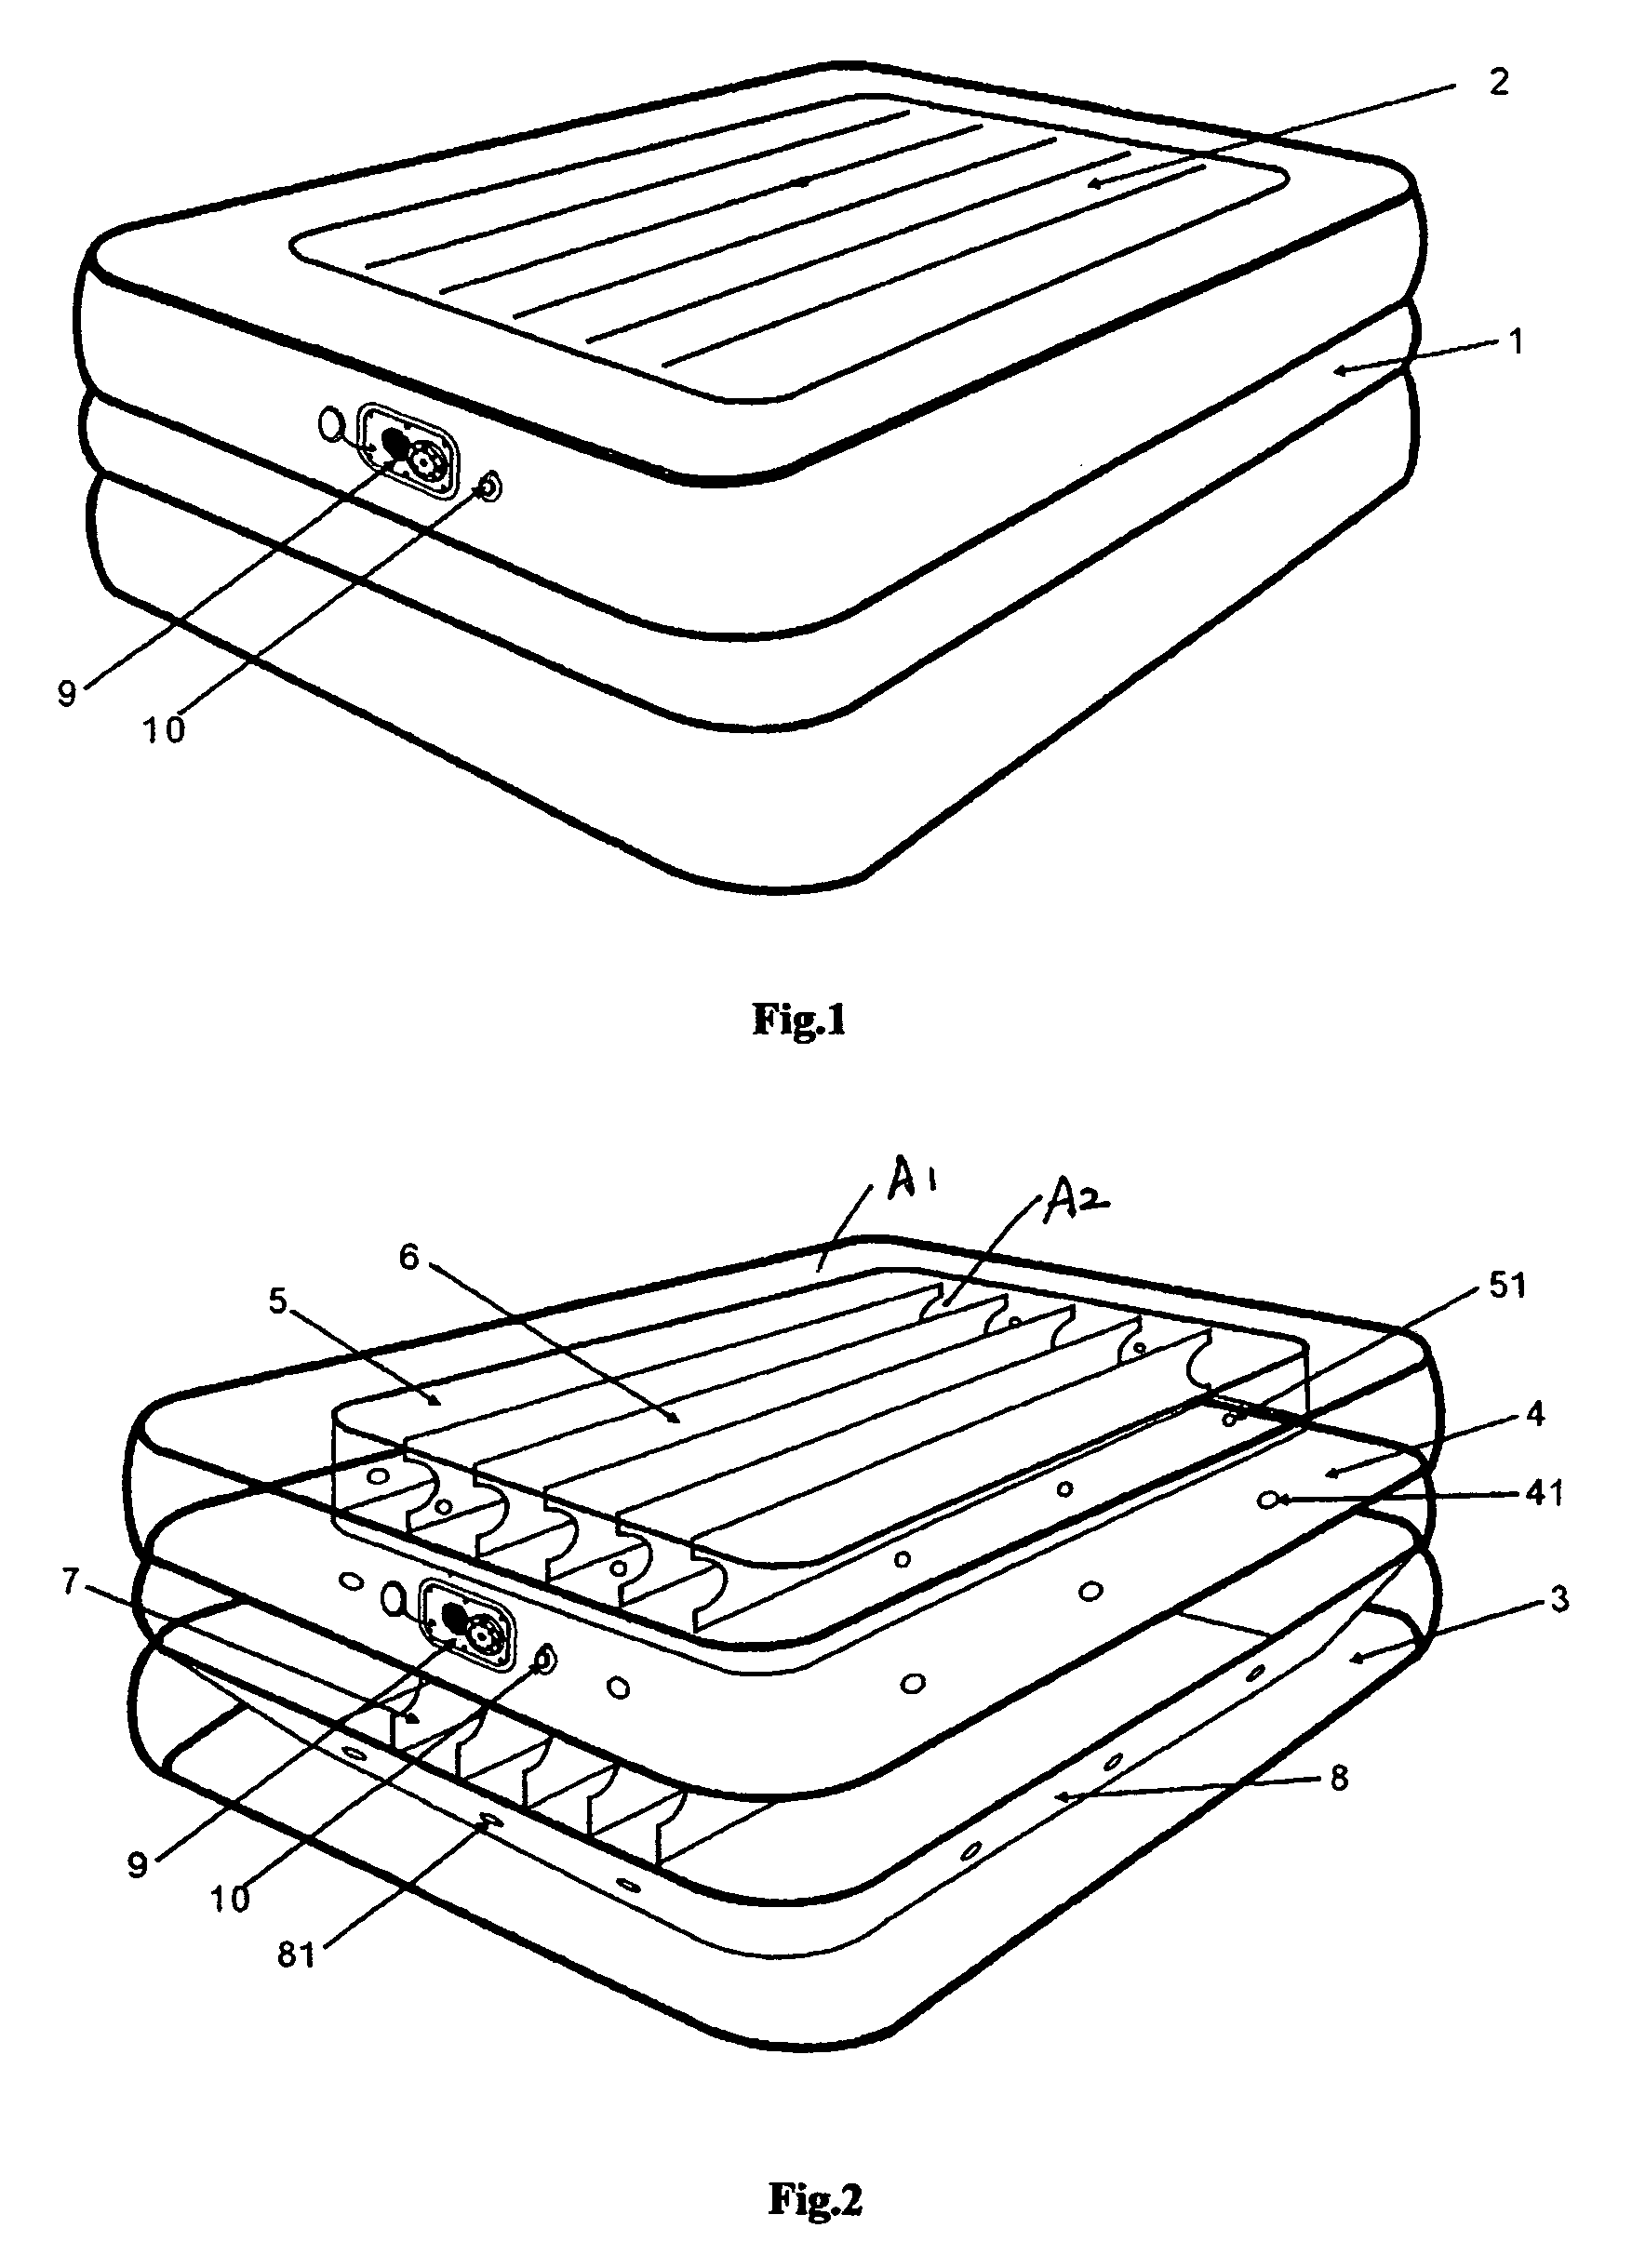 Air bed with stable supporting structure